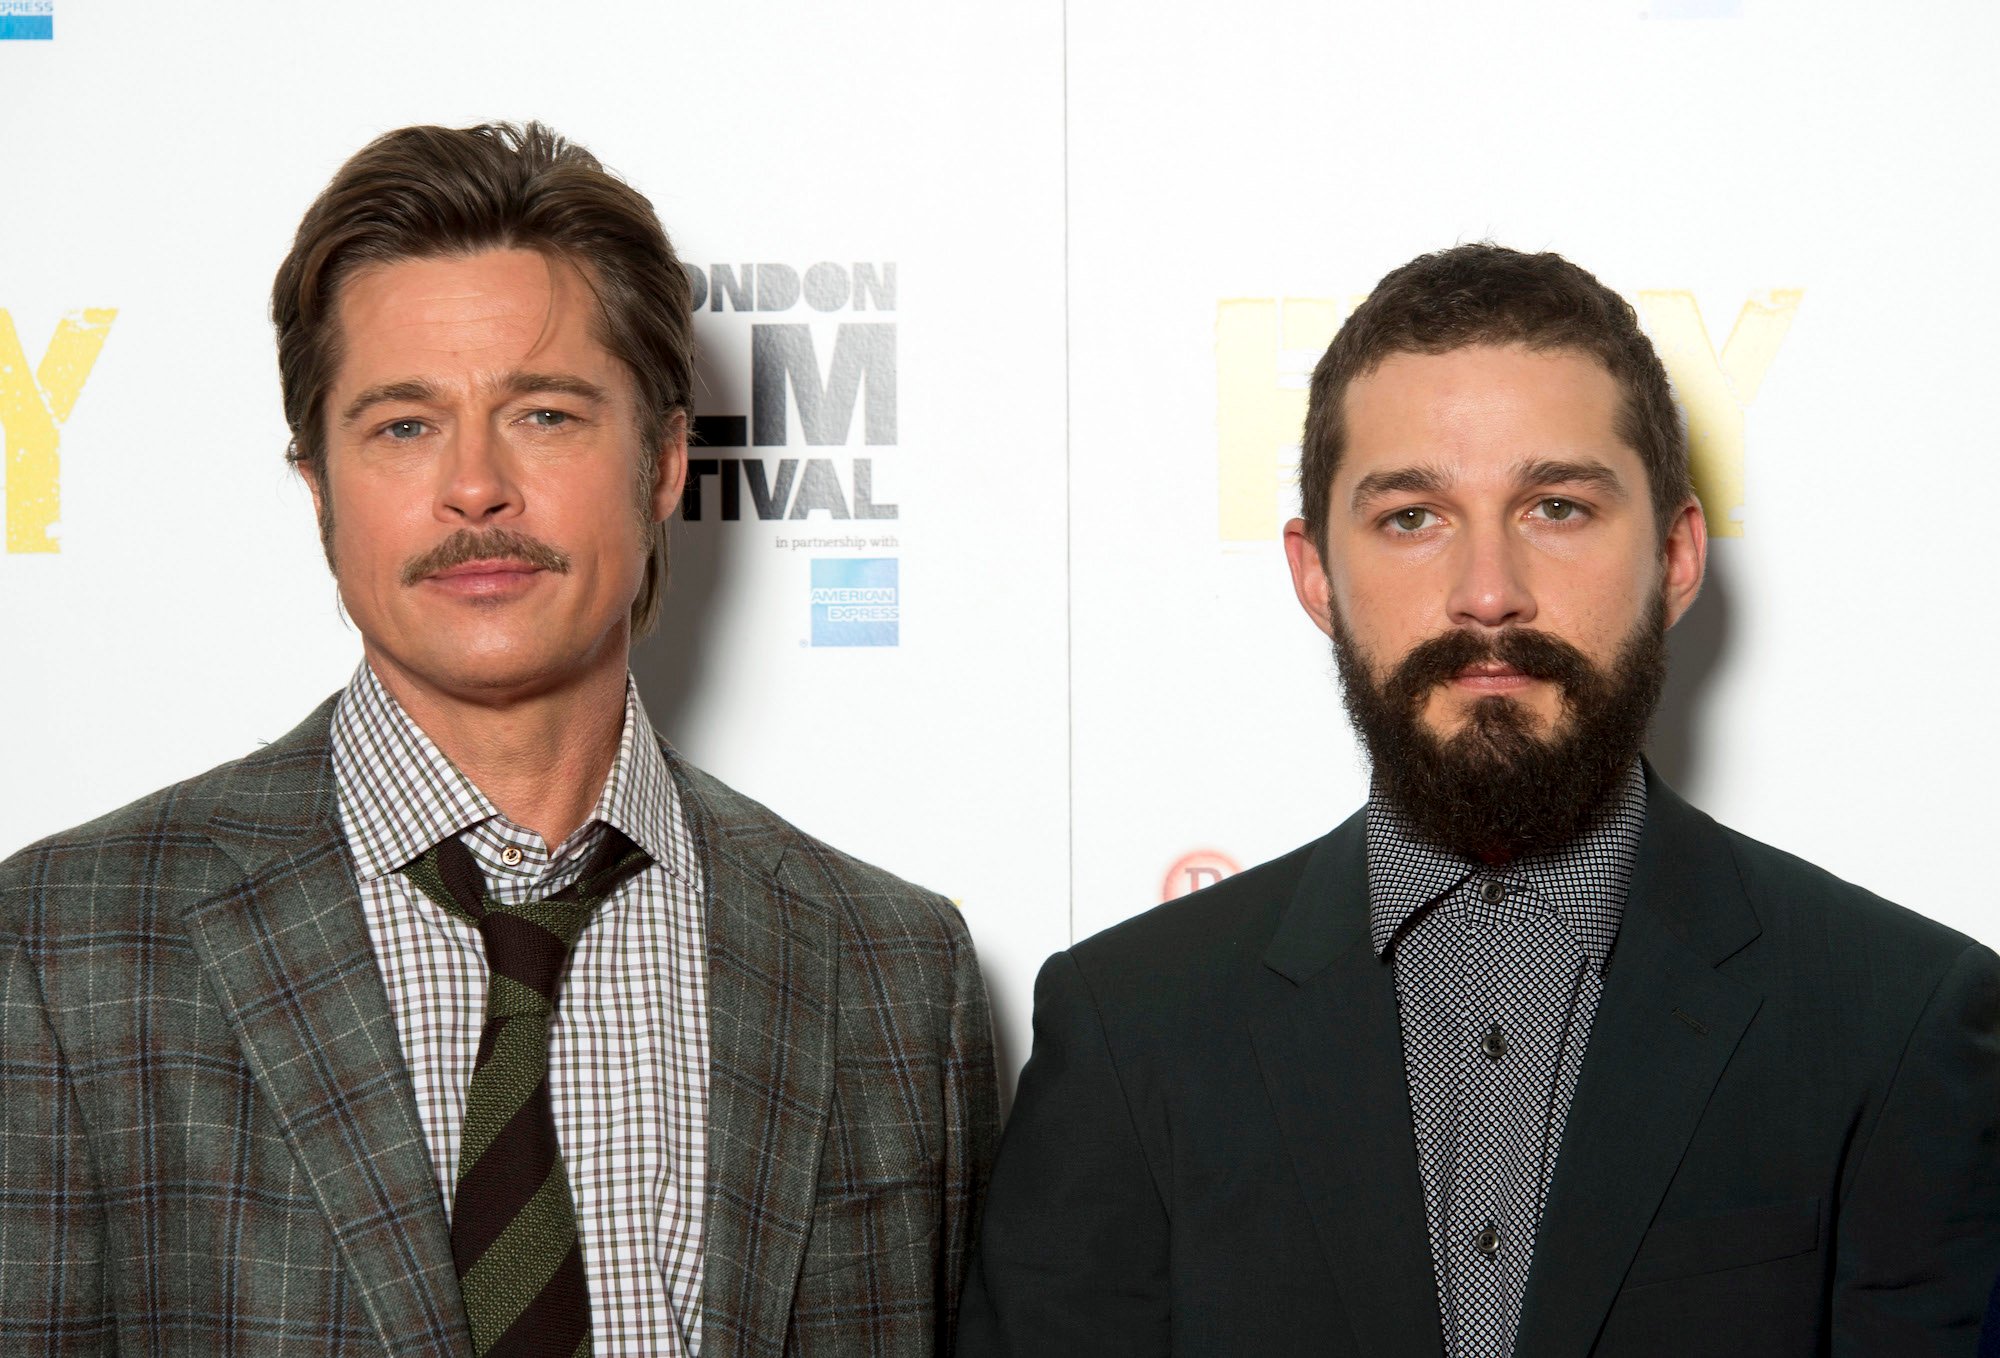 (L-R) Brad Pitt and Shia LaBeouf in front of a white background